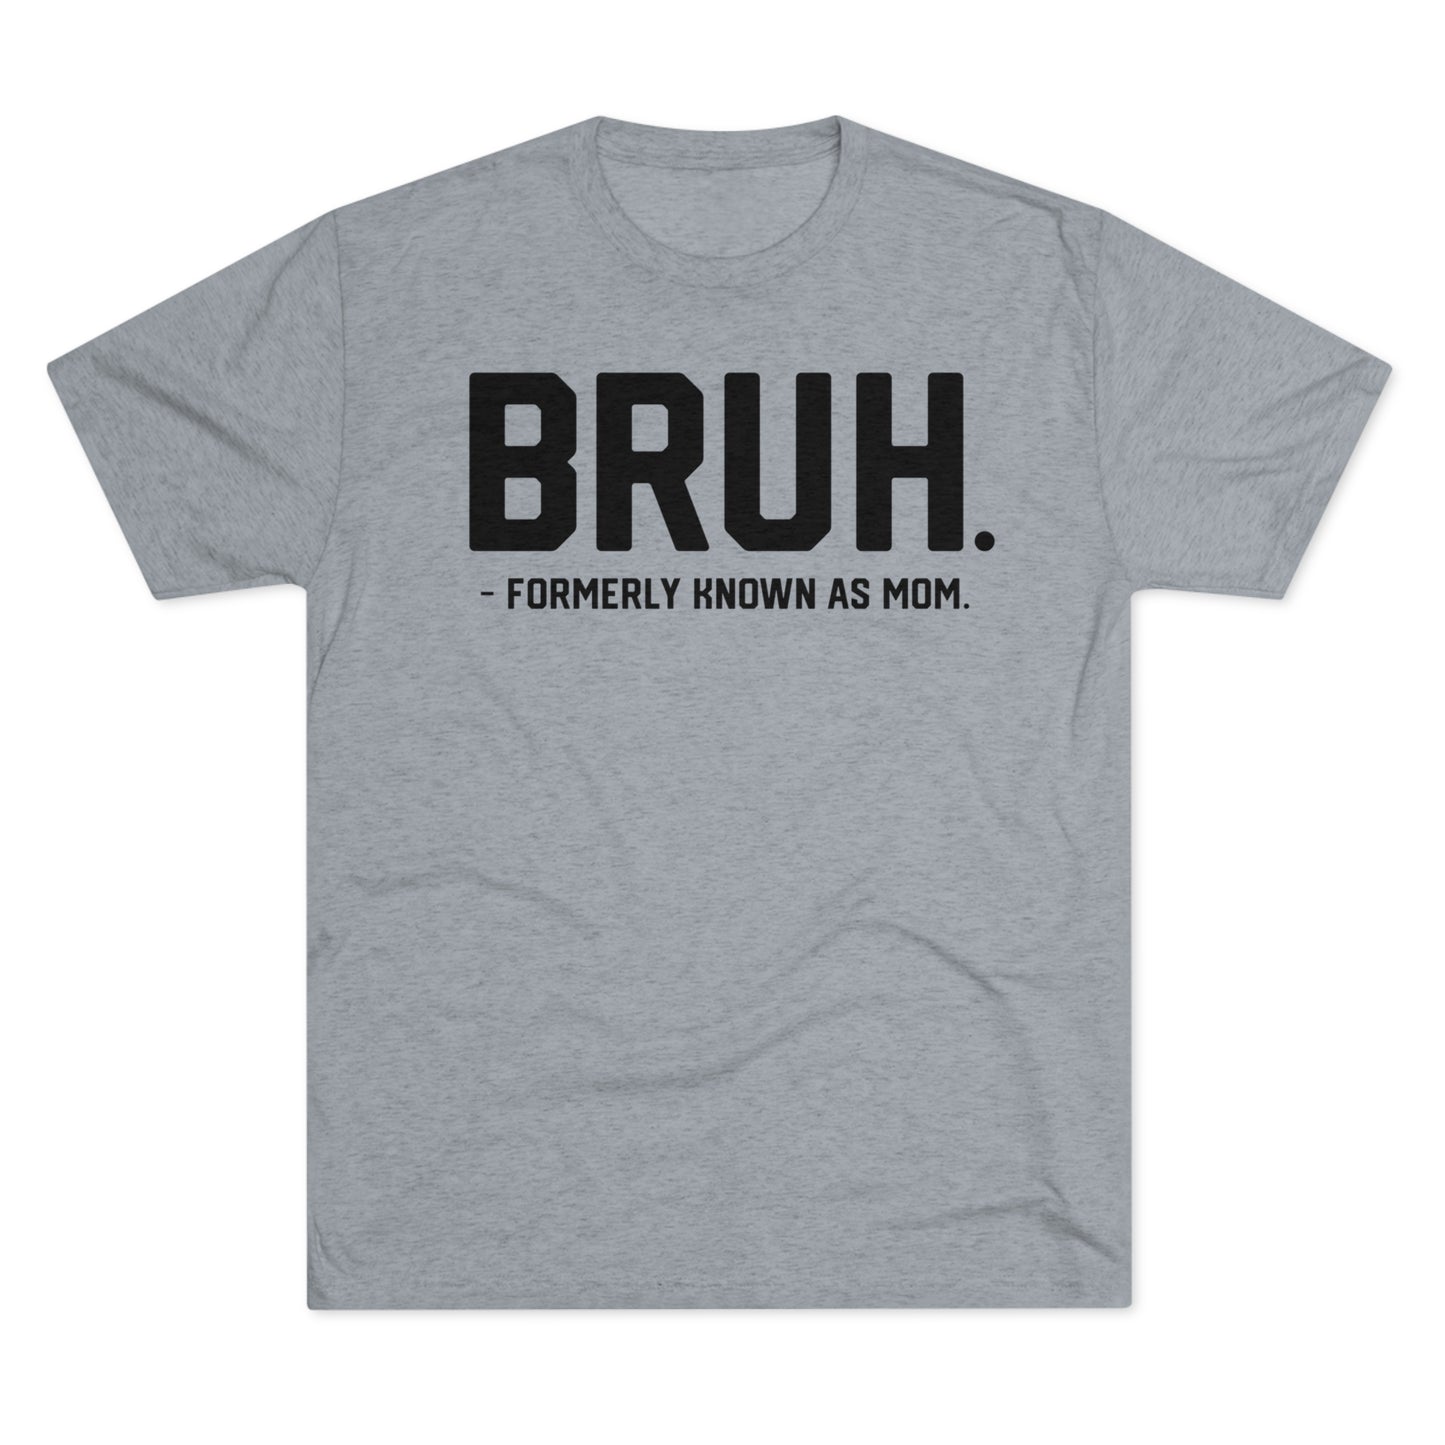 Copy of BRUH. FORMERLY KNOWN AS MOM-Unisex Tri-Blend Crew Tee